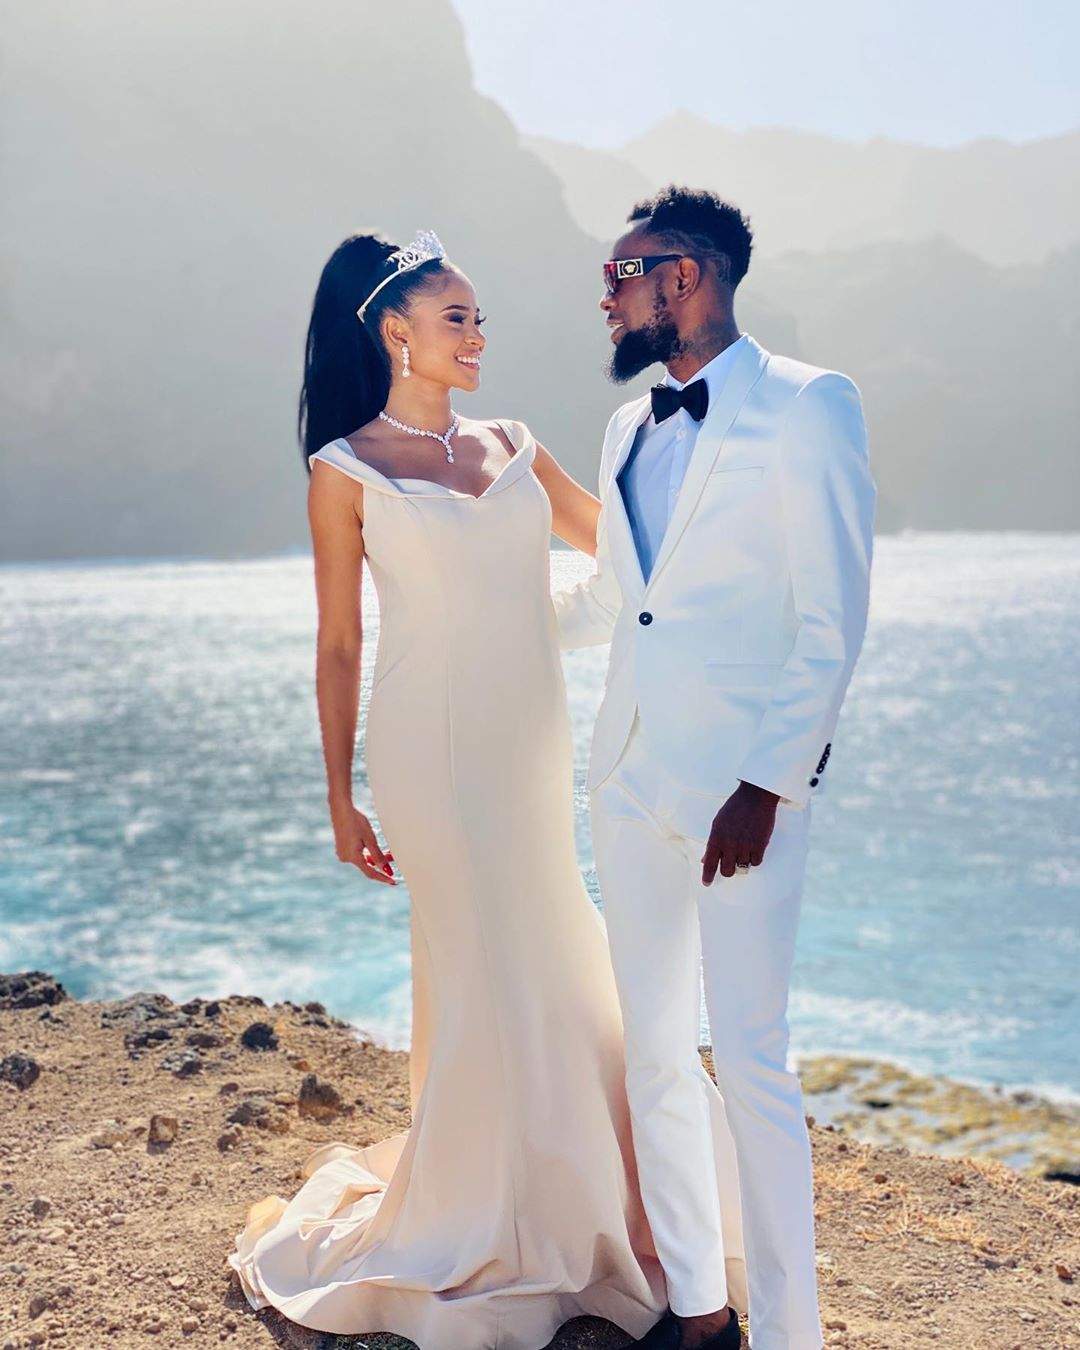 "Now And Forever!" - Patoranking Posts Pre-Wedding Photos